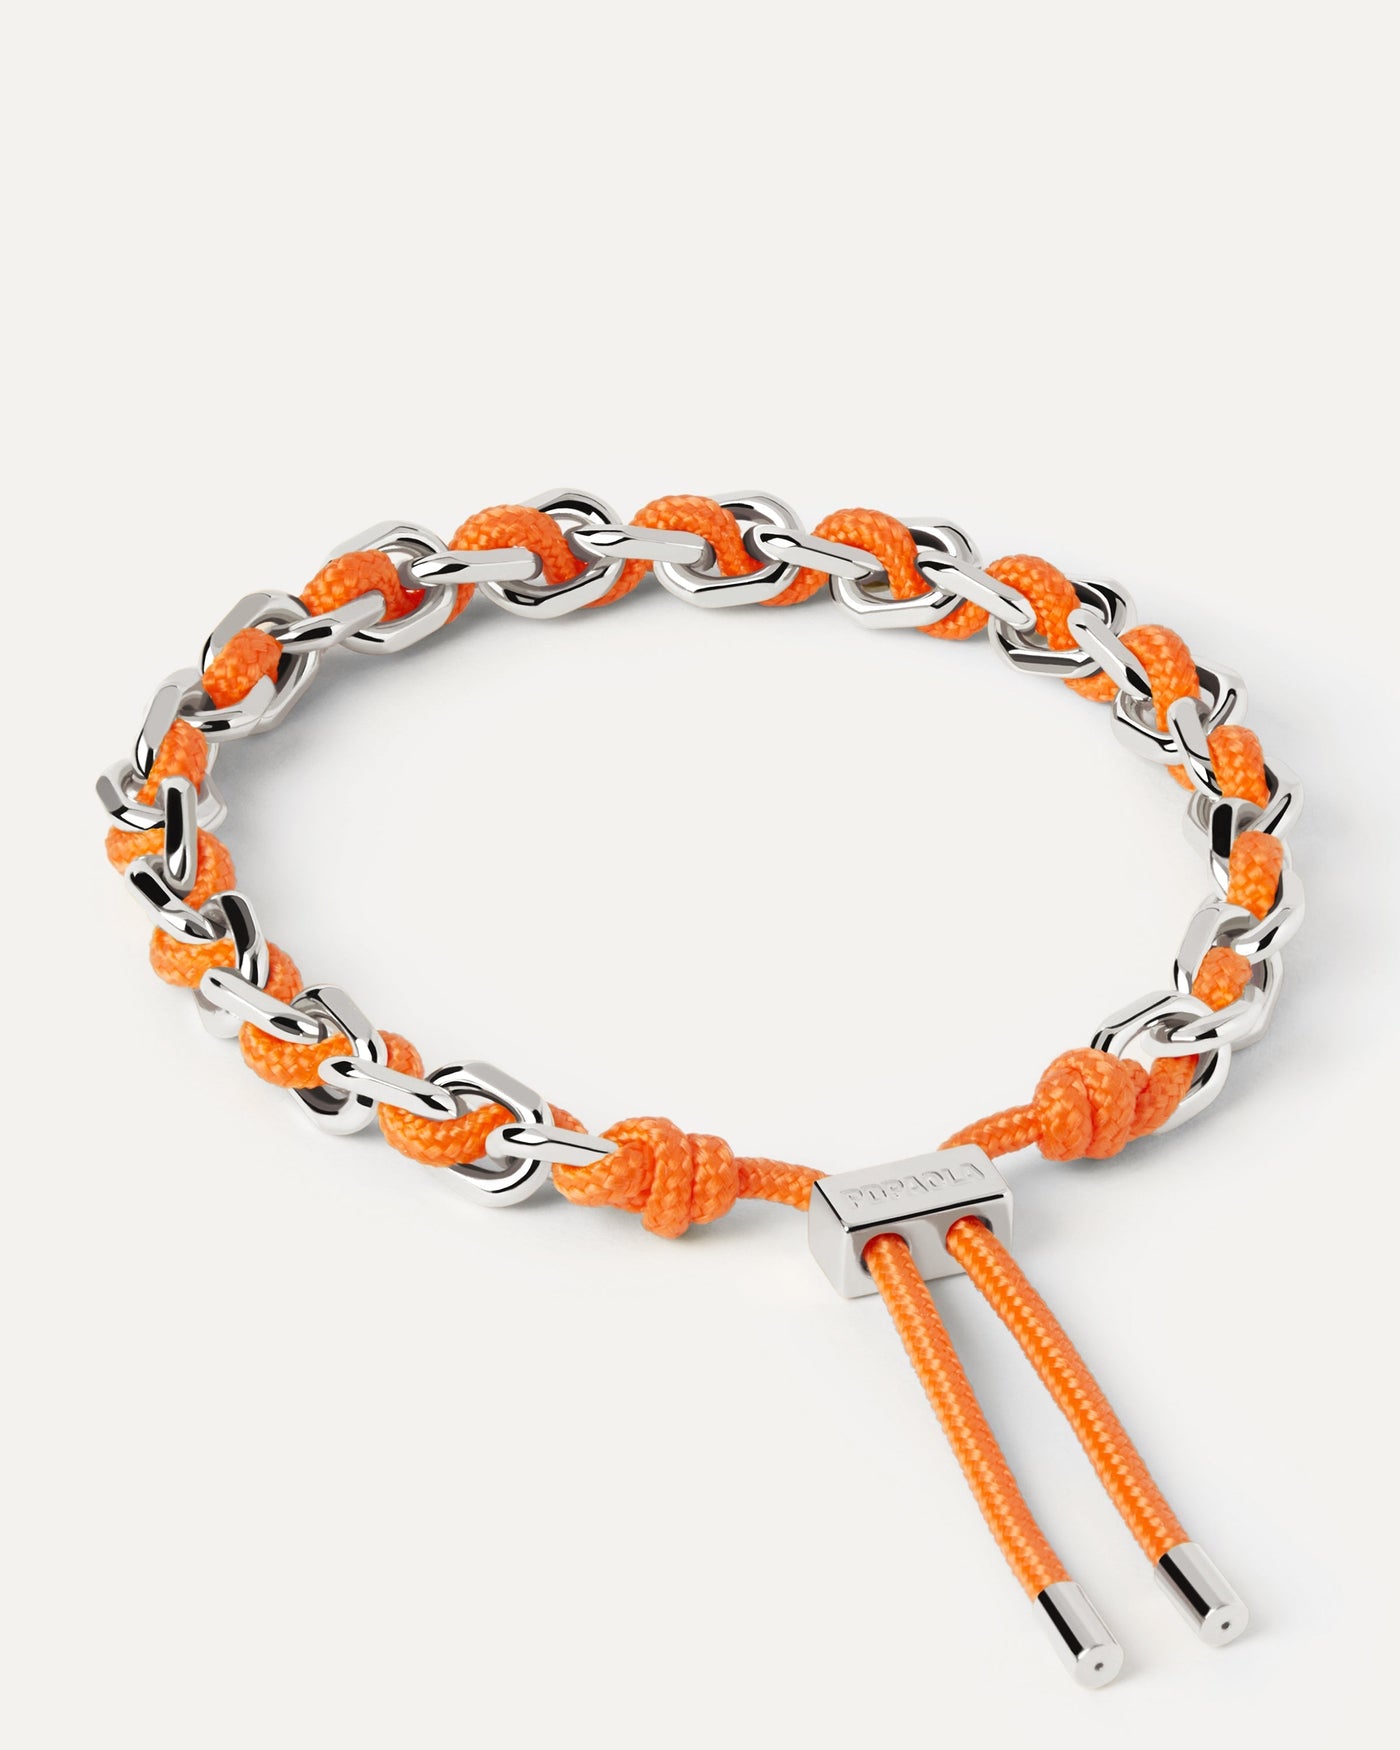 2023 Selection | Tangerine Rope and Chain Silver Bracelet. Silver chain bracelet with an orange rope adjustable sliding clasp. Get the latest arrival from PDPAOLA. Place your order safely and get this Best Seller. Free Shipping.